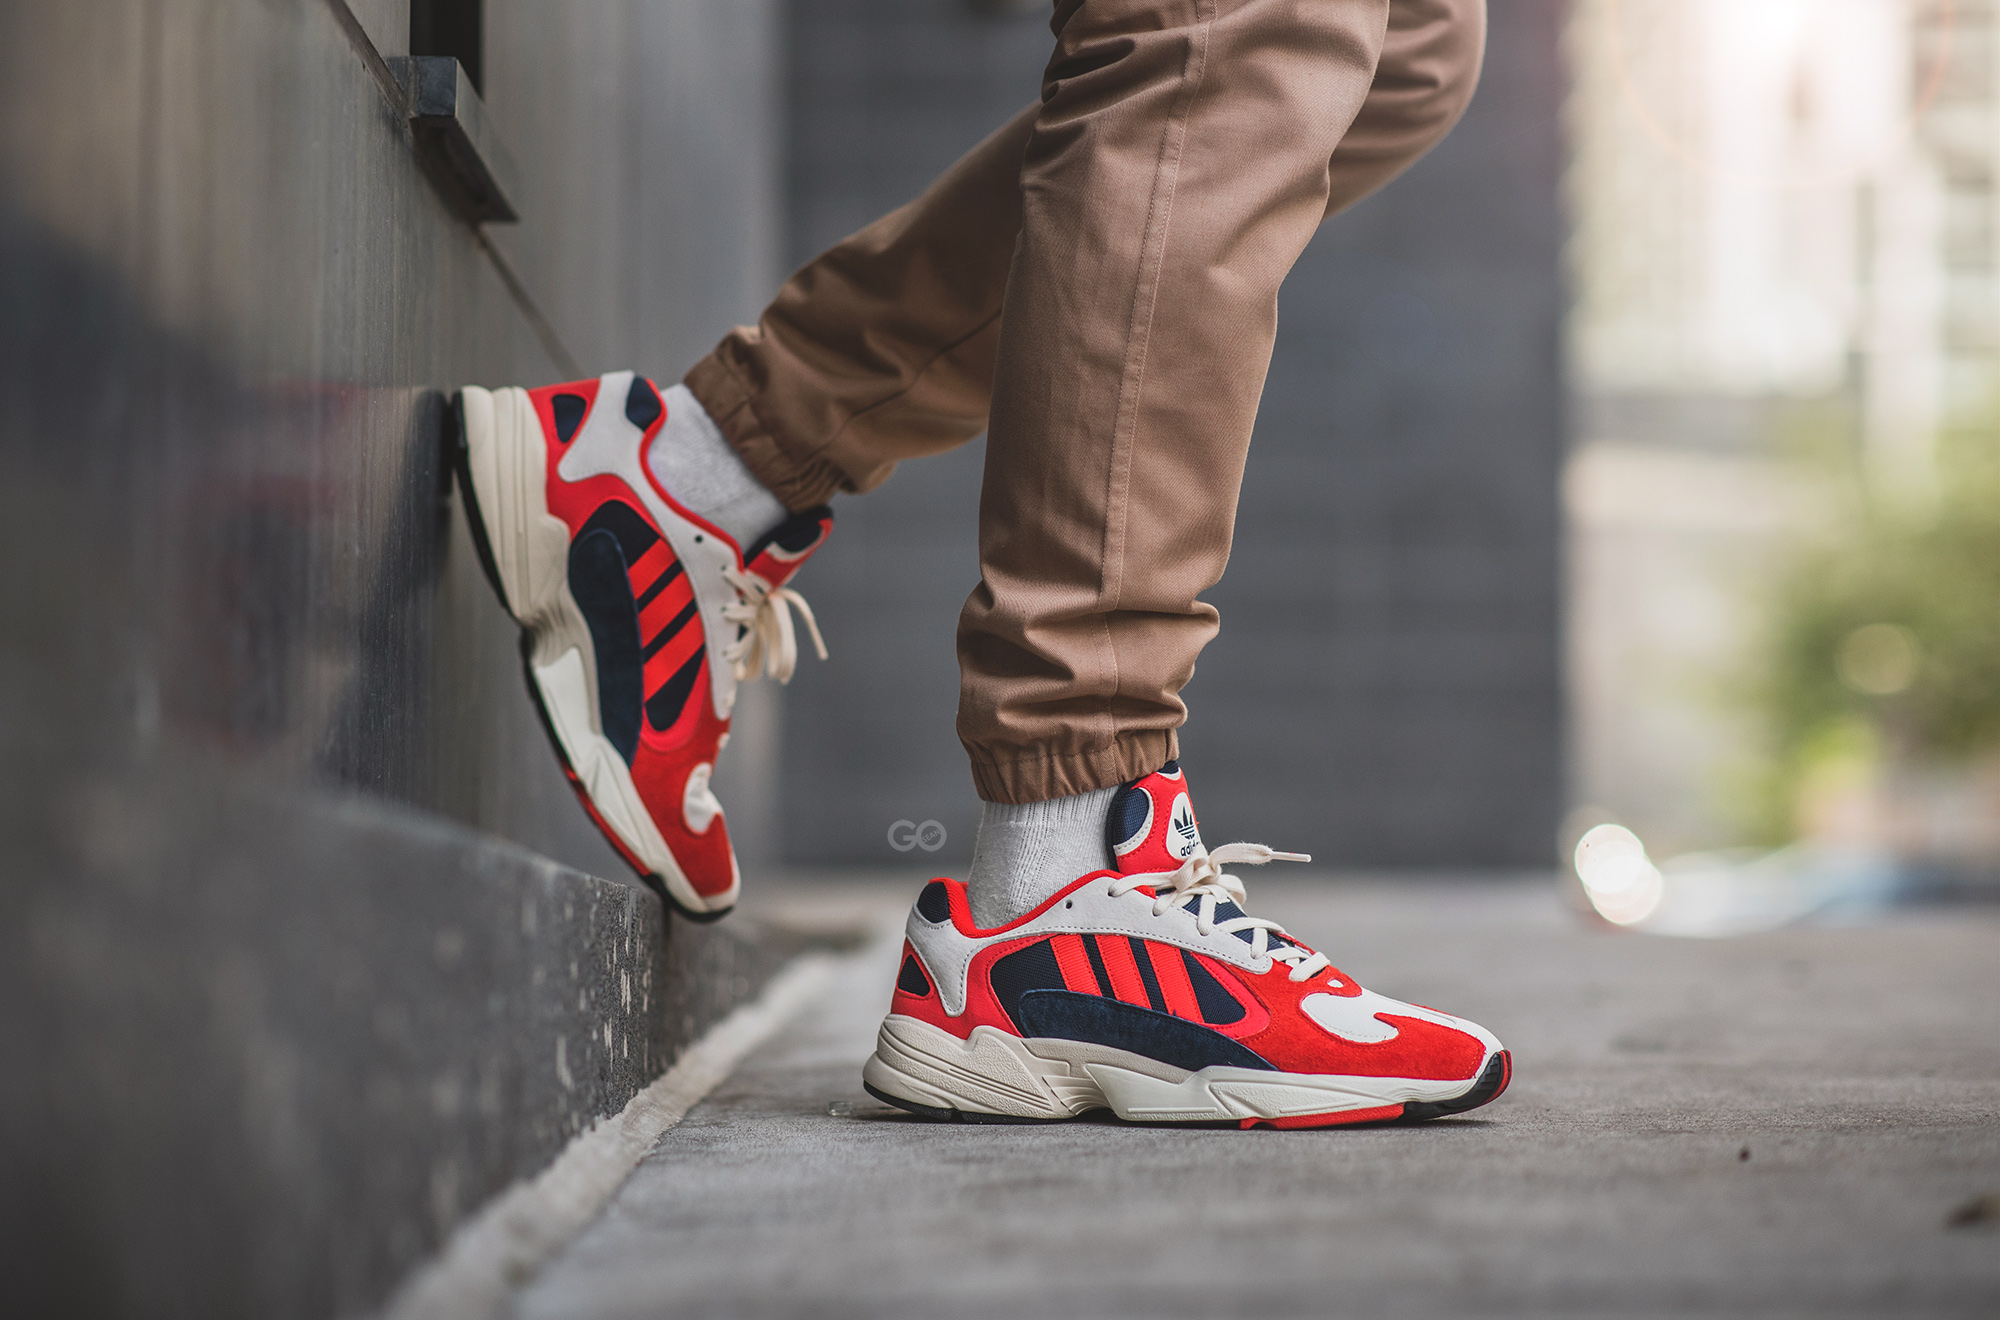 adidas yung 1 collegiate navy red